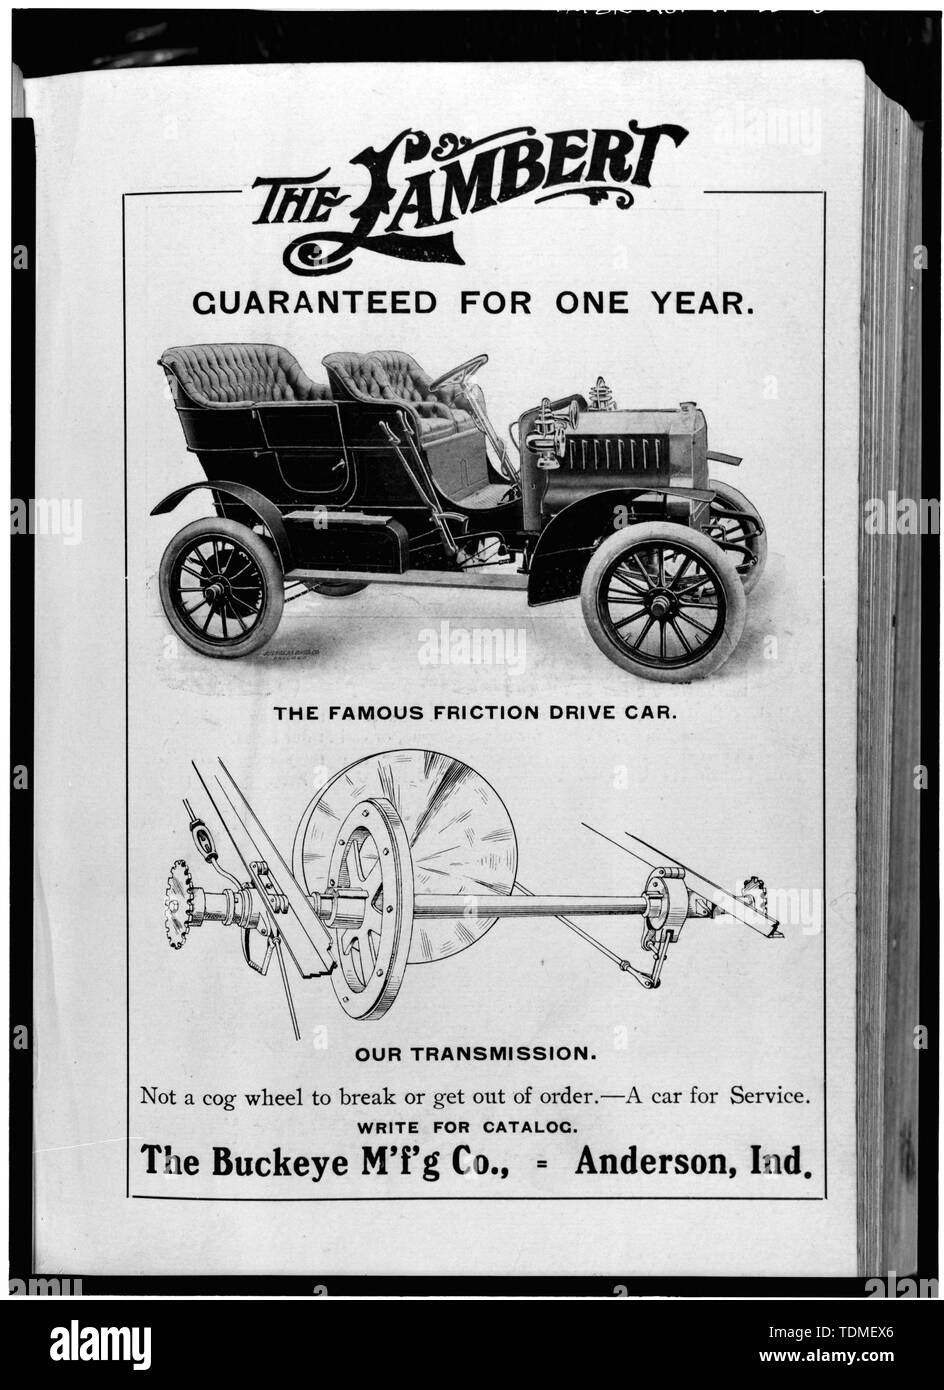 PHOTOCOPY ADVERTISING VIEW OF THE LAMBERT AUTOCAR WITH CUTAWAY OF TRANSMISSION, FROM ANDERSON CITY DIRECTORY, CA. 1906-1907 - Buckeye Manufacturing Company, Columbia Avenue, Anderson, Madison County, IN; Lambert Brothers Manufacturing Company; Lambert, John William; Boucher, Jack E; Sackheim, Donald; Rosenberg, Robert Stock Photo